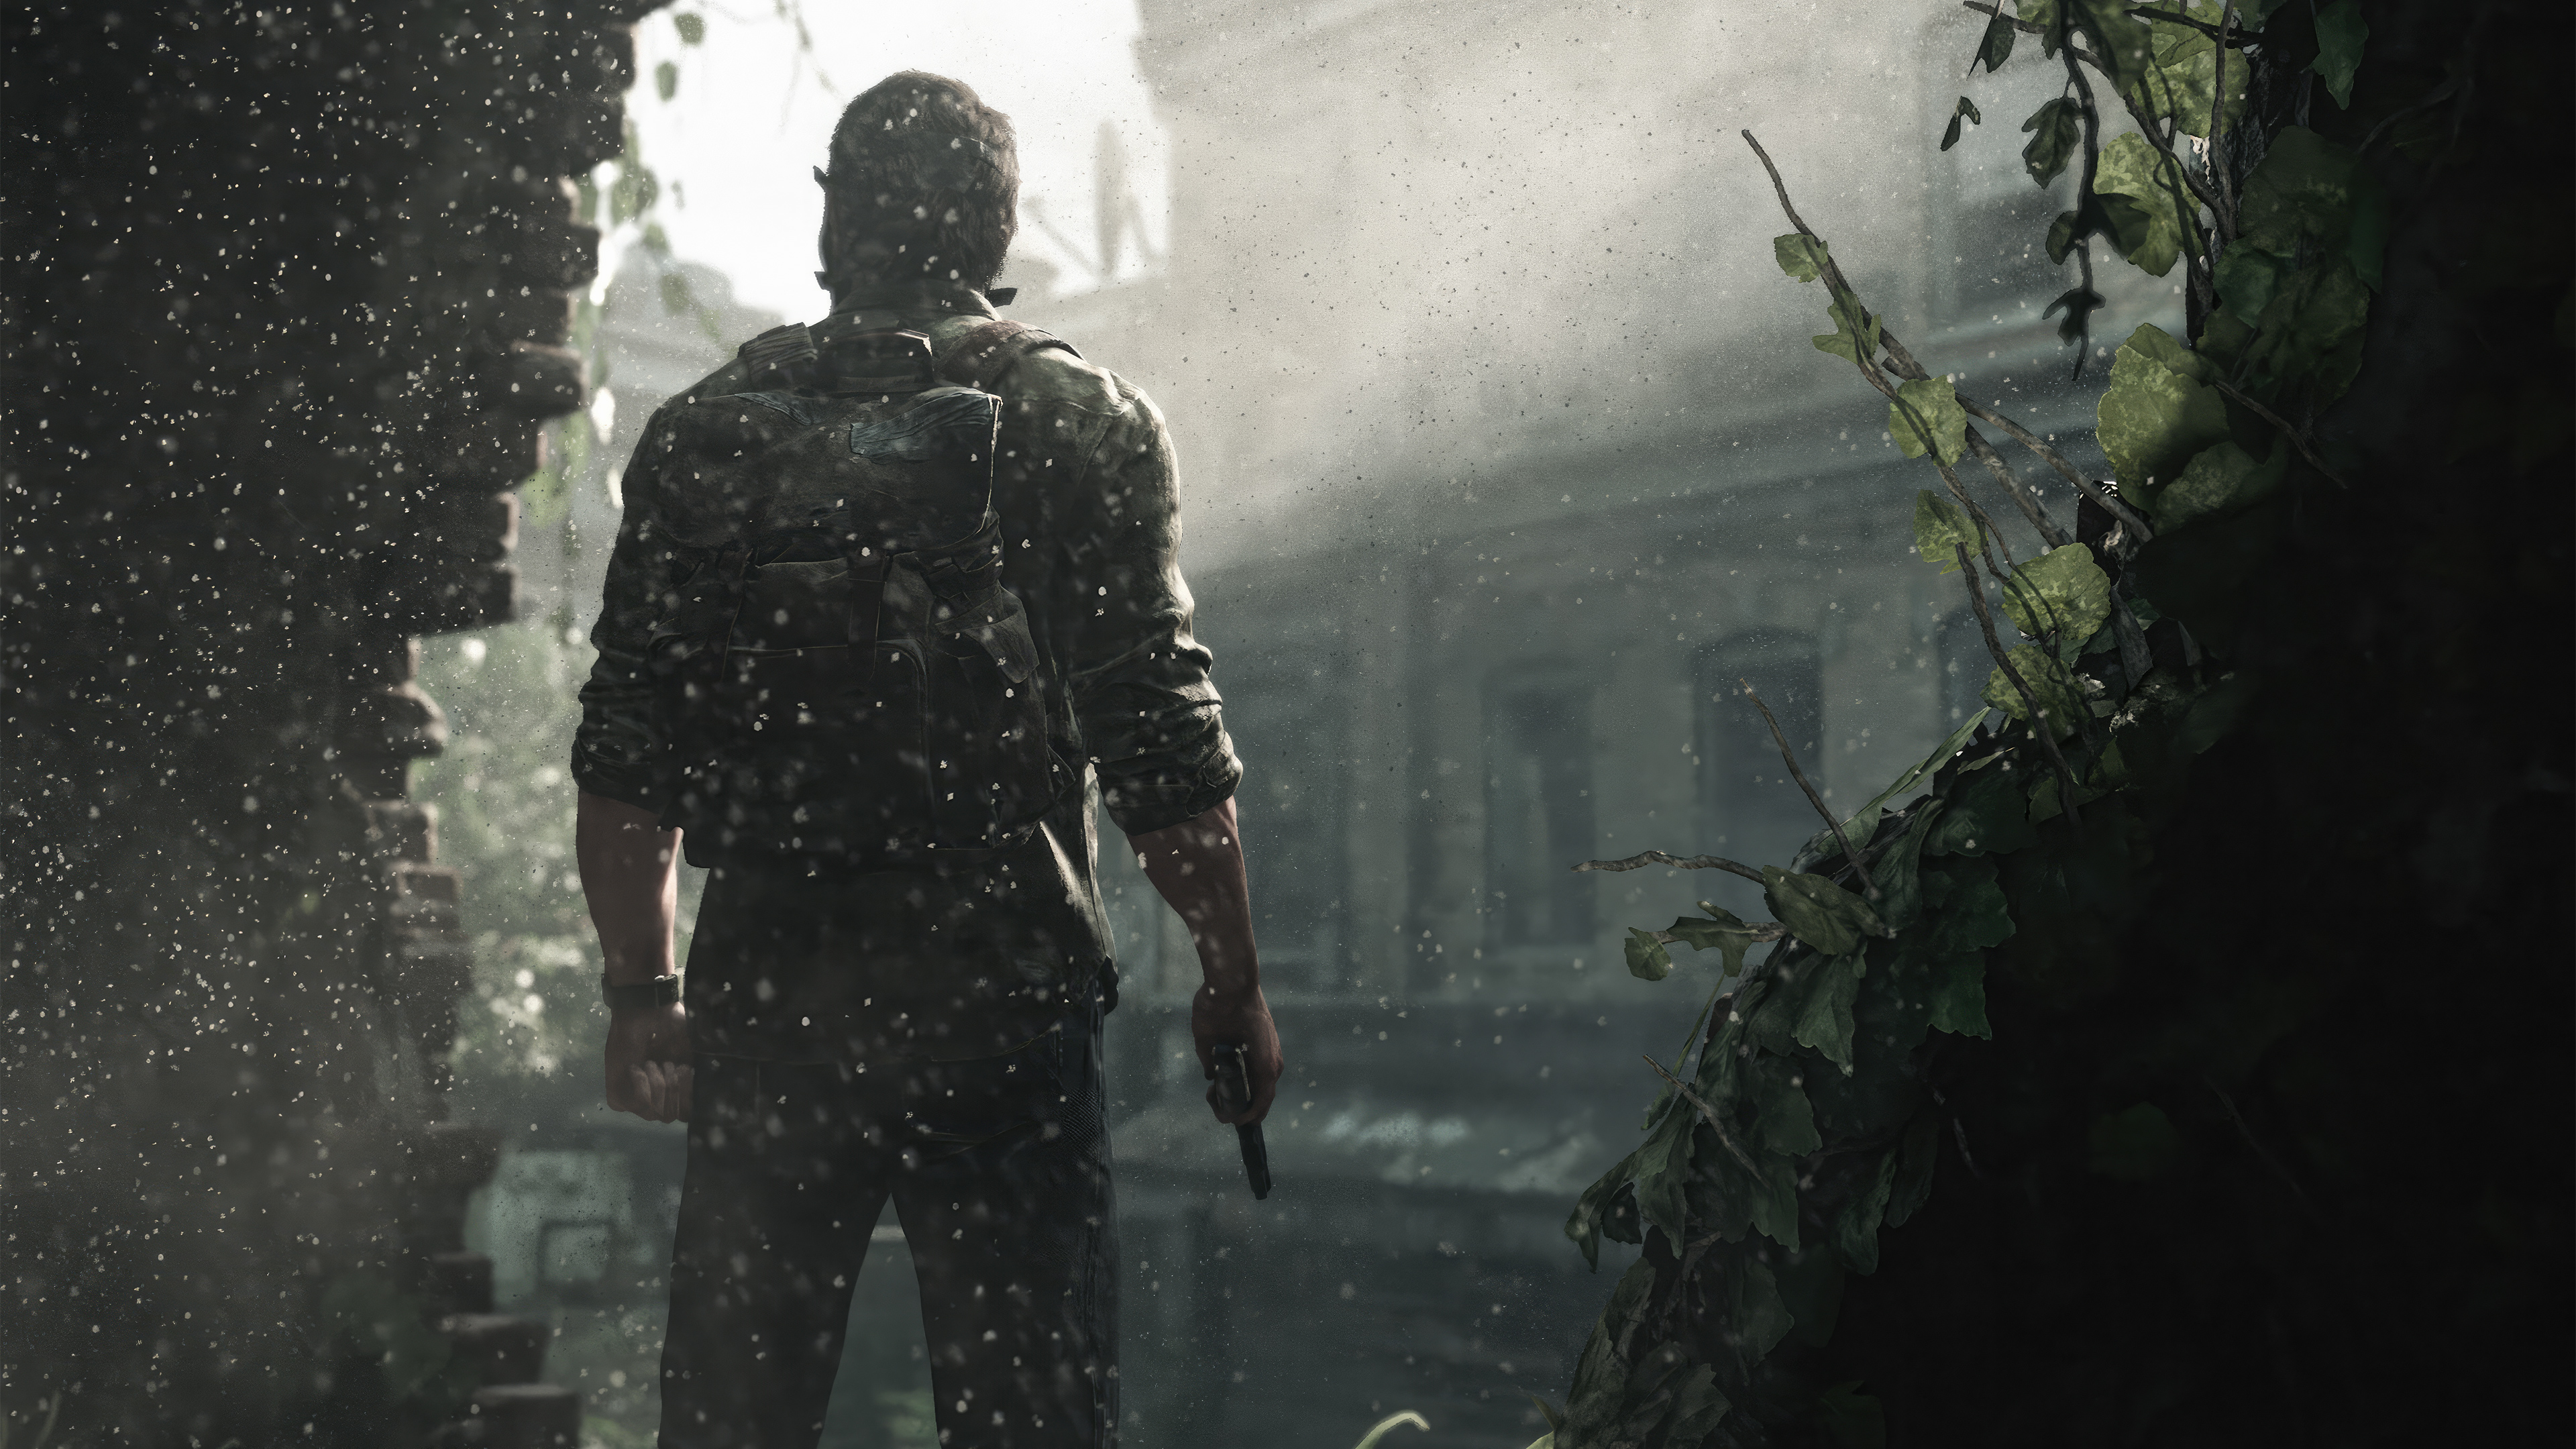 The Last Of Us Part 1 Wallpapers - Wallpaper Cave